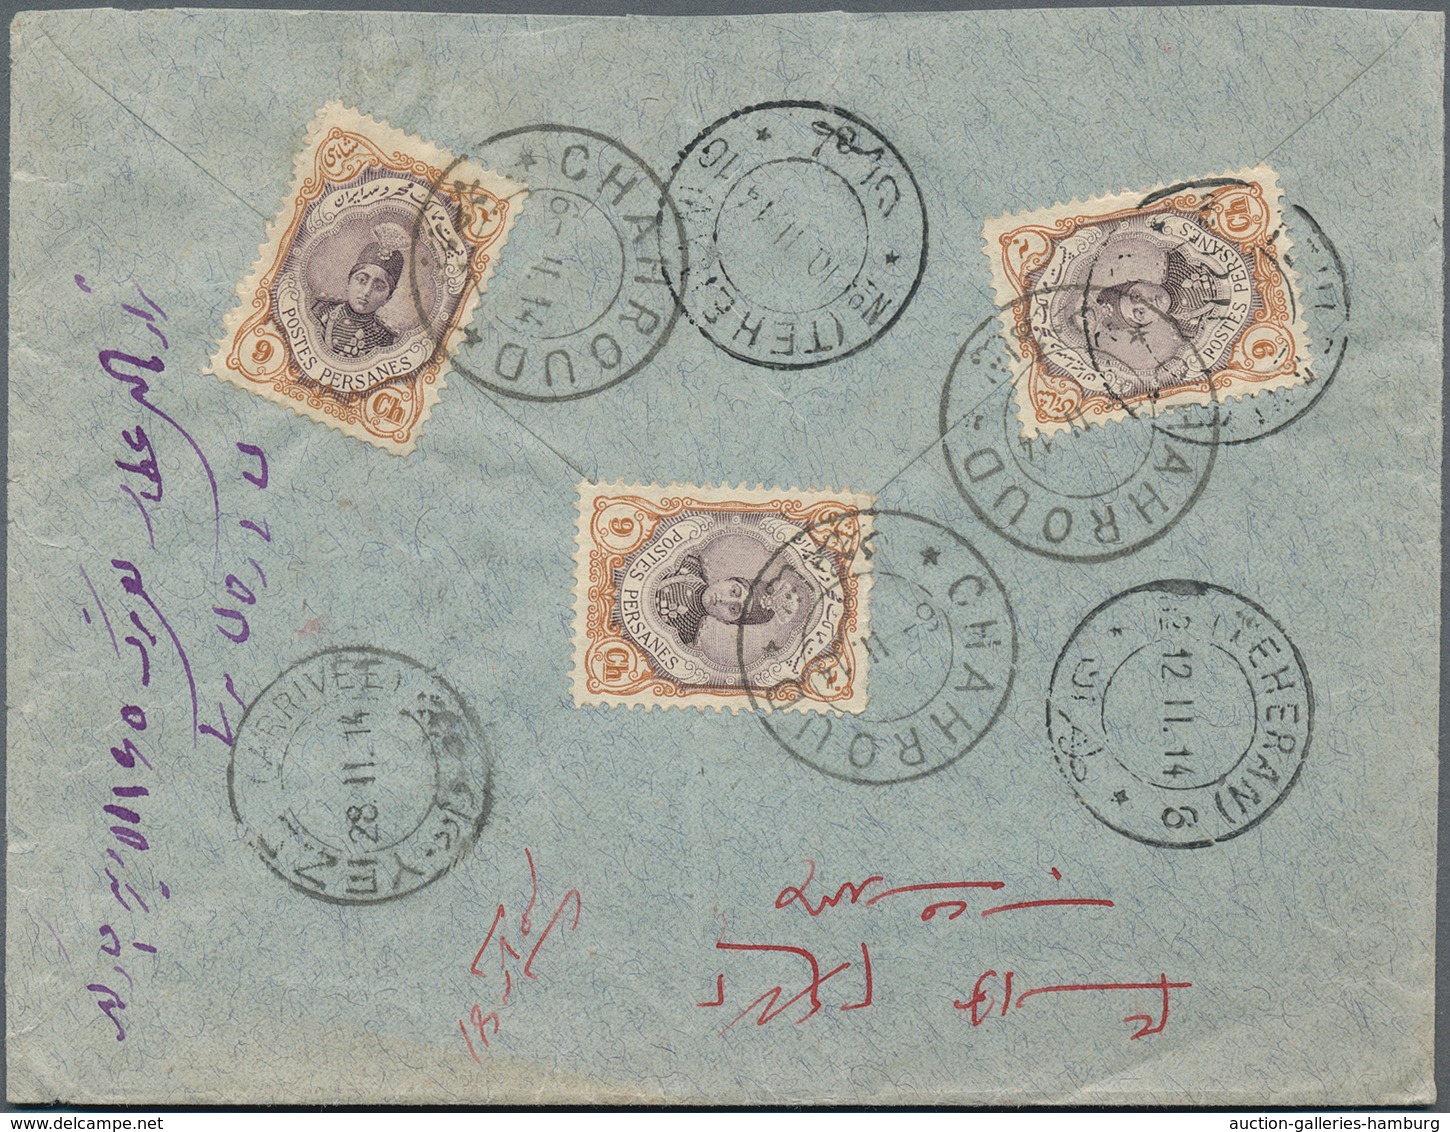 Iran: 1876/1976 (ca.), outstanding accumulation of more than 130 pieces, covers, parcel bills and po